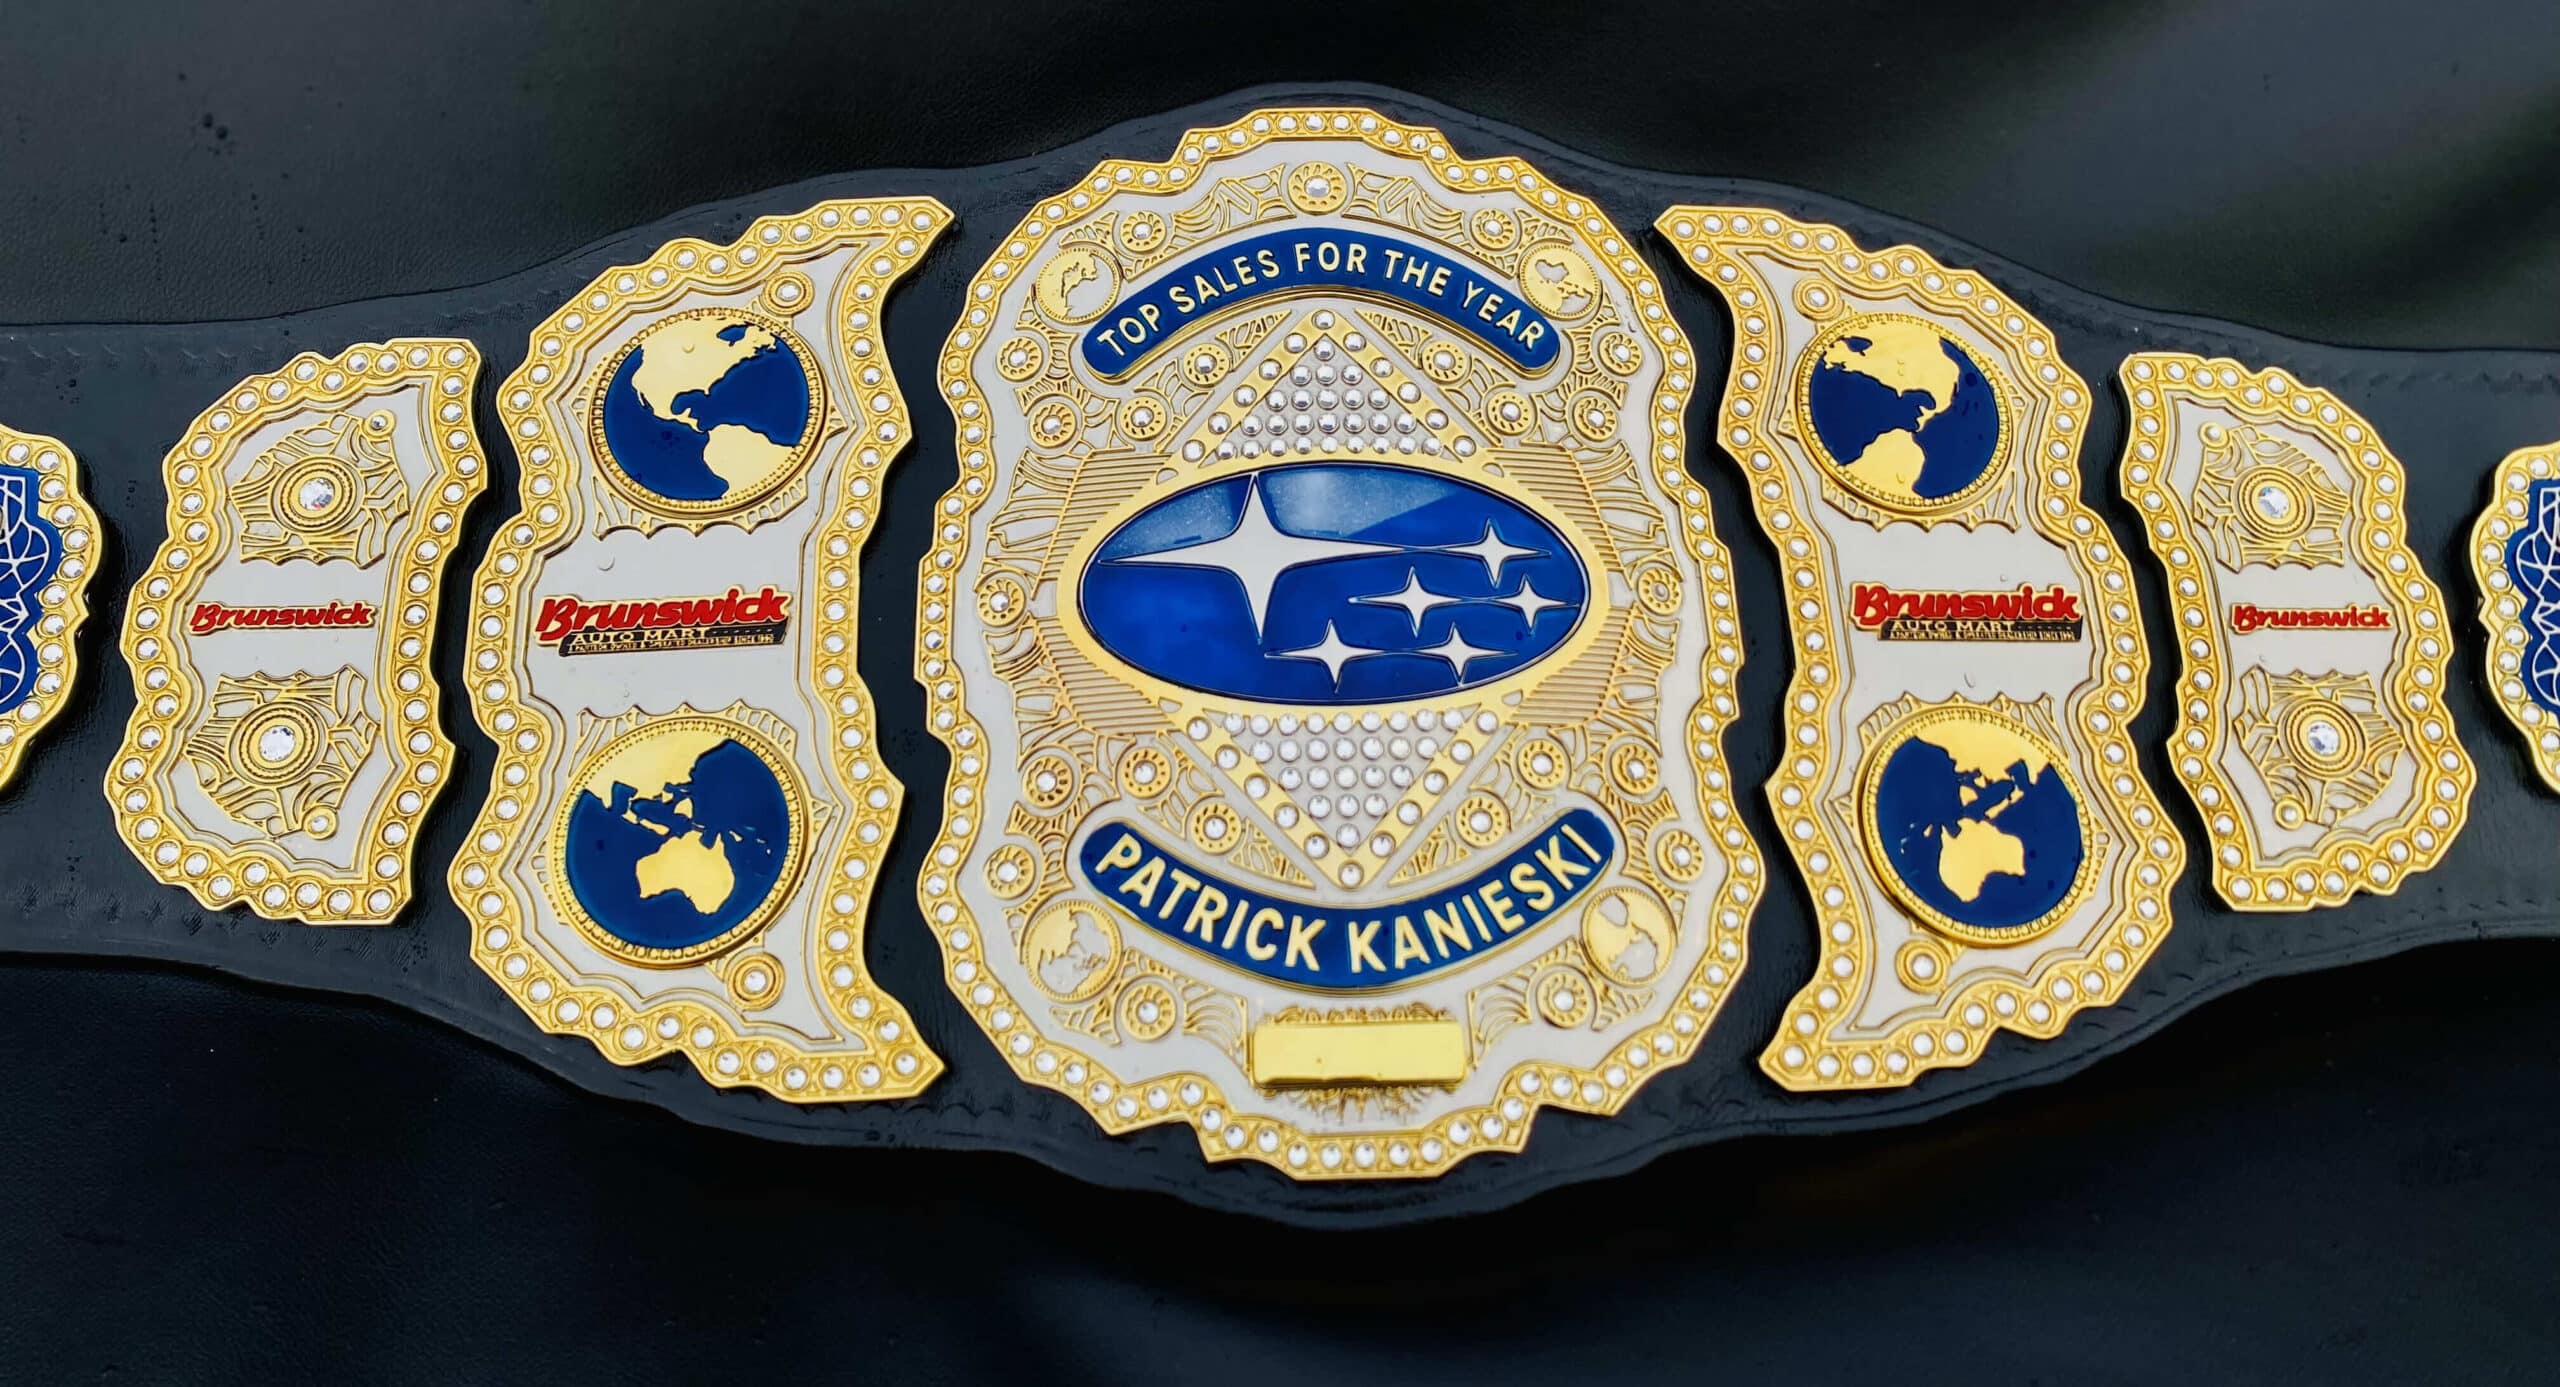 Custom Wrestling Belts with Your Details to Celebrate Victories